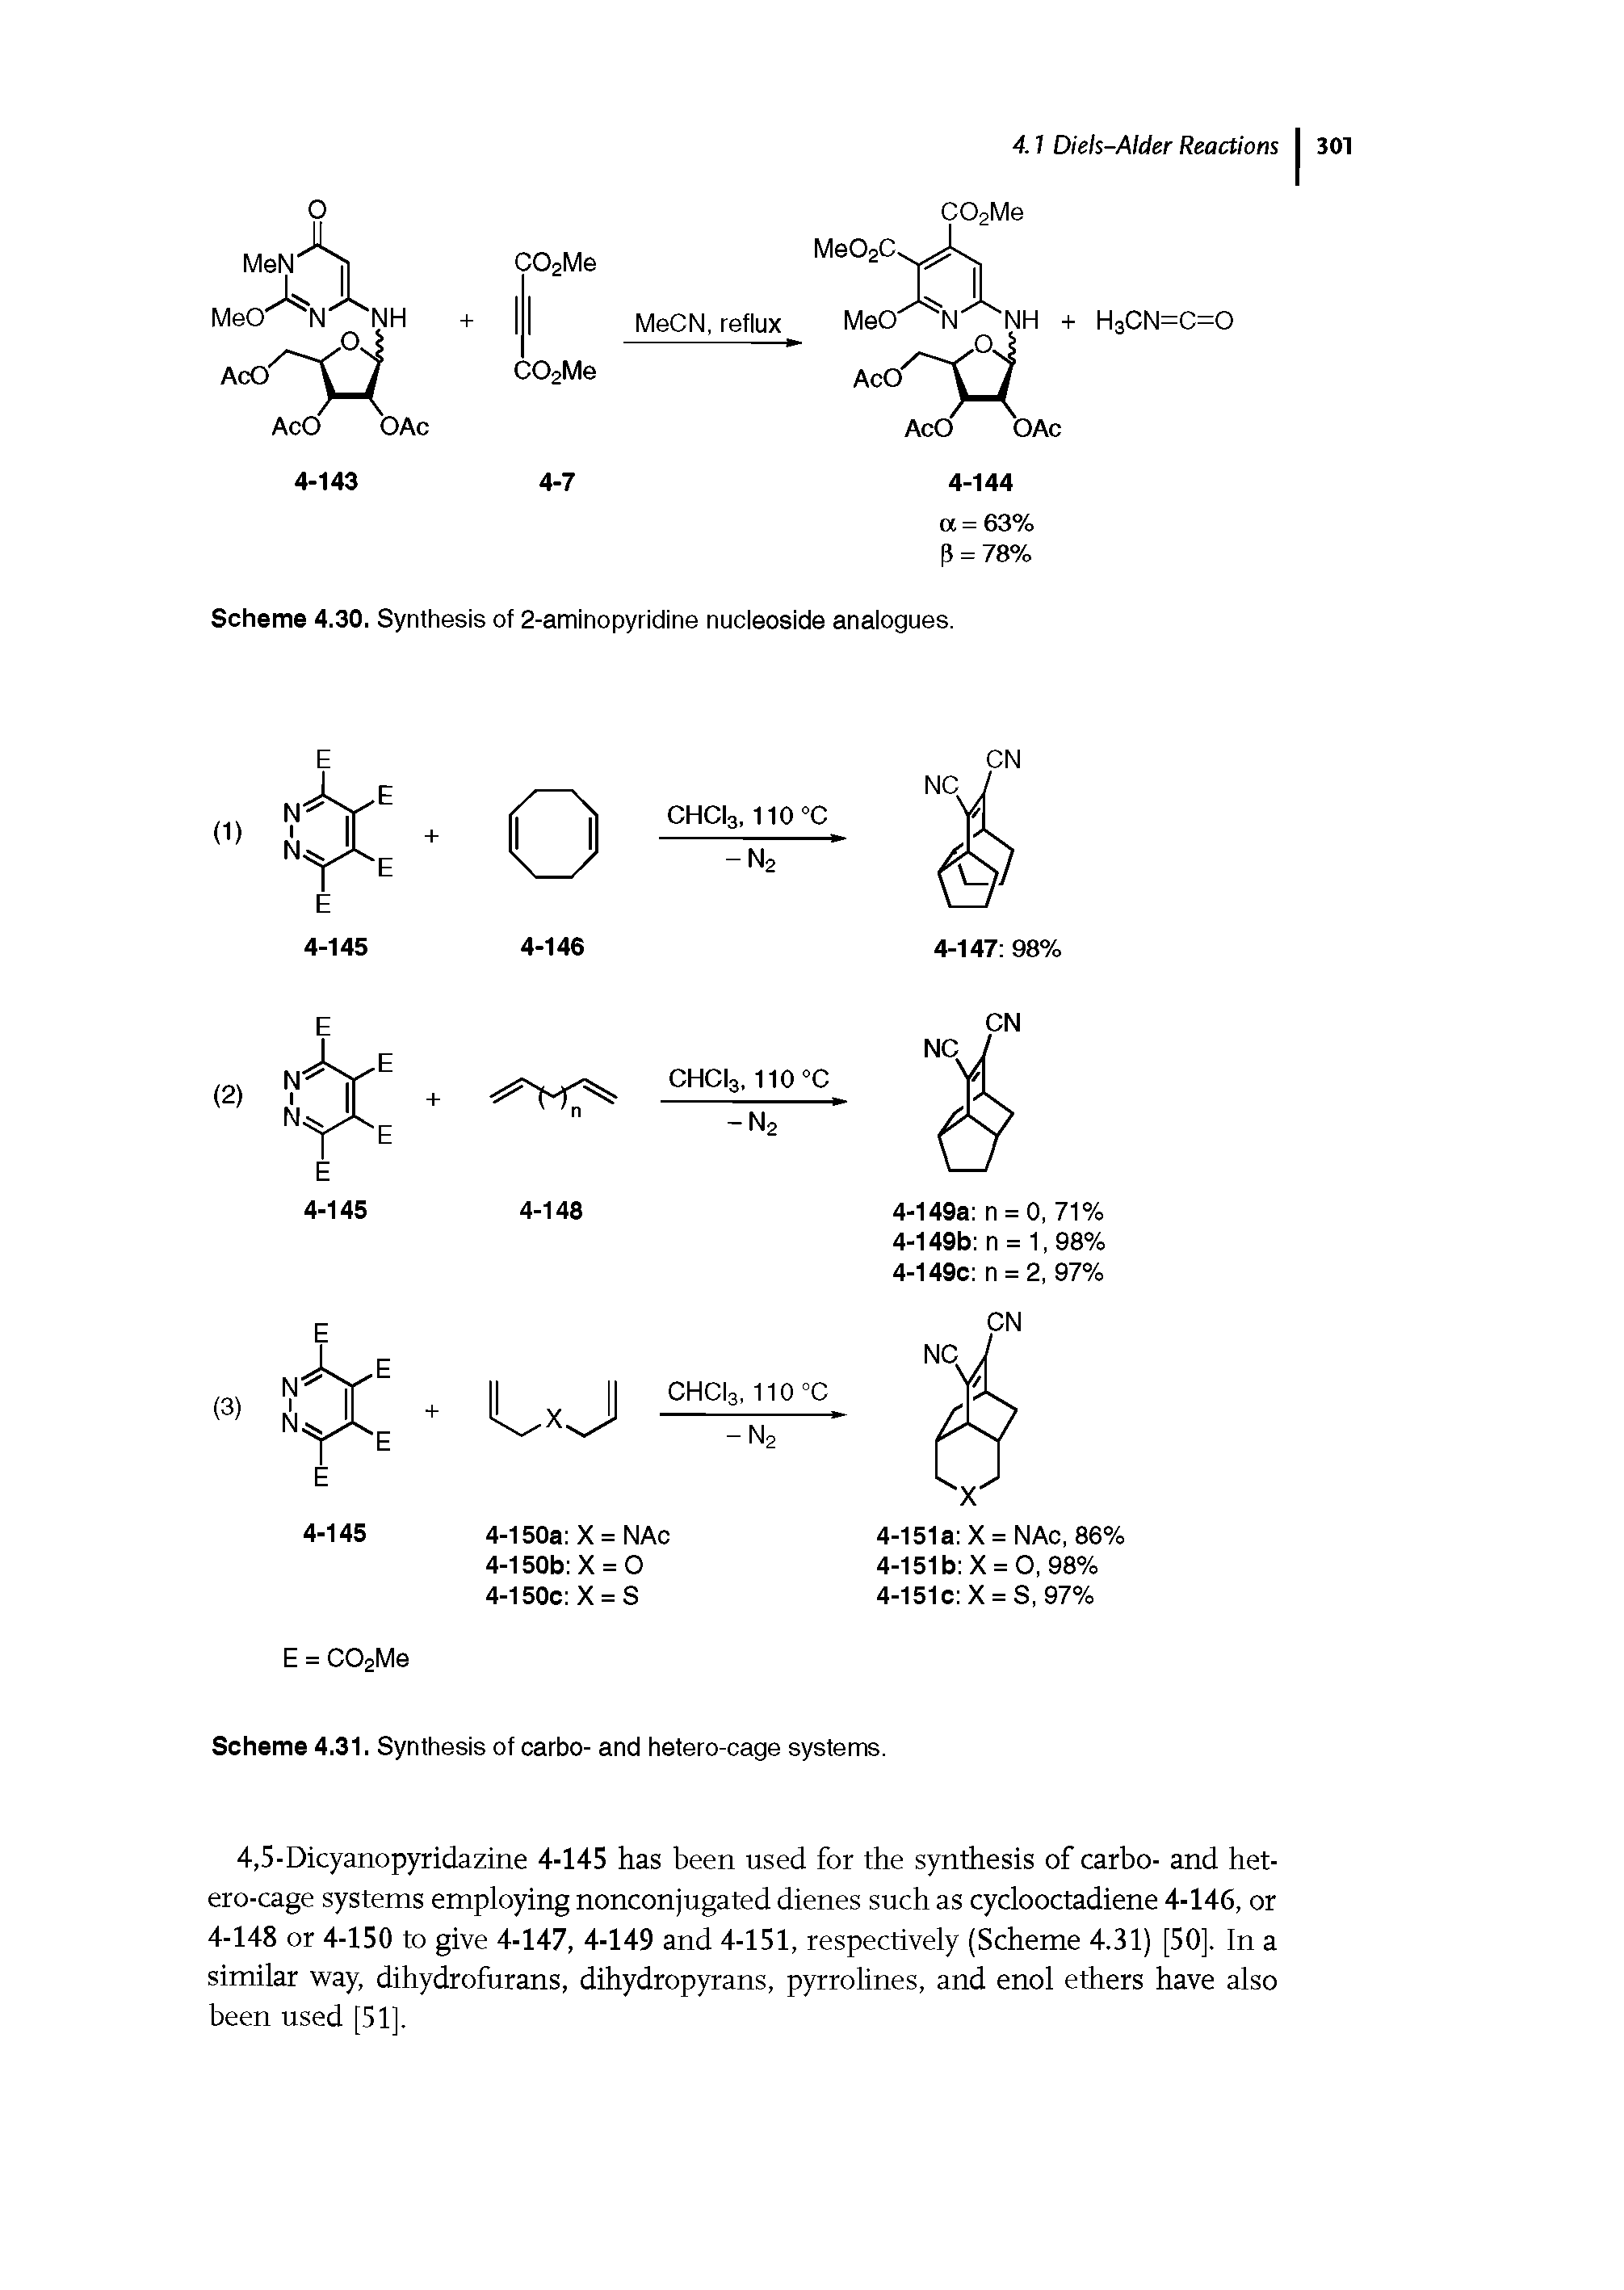 Scheme 4.31. Synthesis of carbo- and hetero-cage systems.